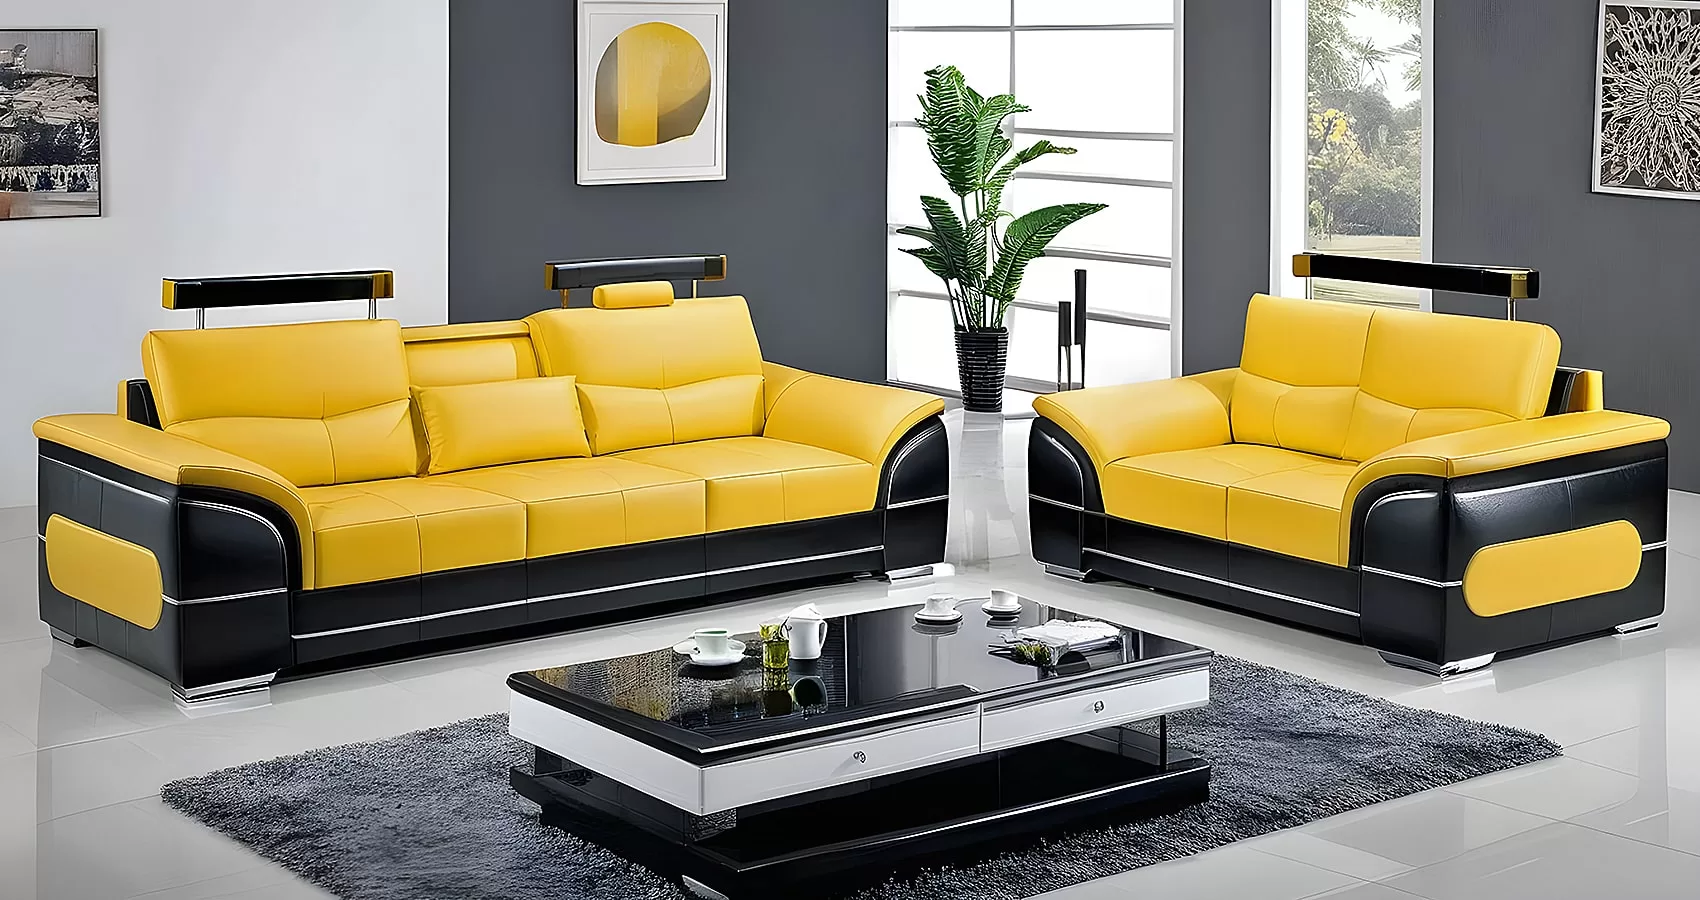 Leather Yellow Sofa | Leather Yellow Couch: A Stylish and Vibrant Addition to Your Home